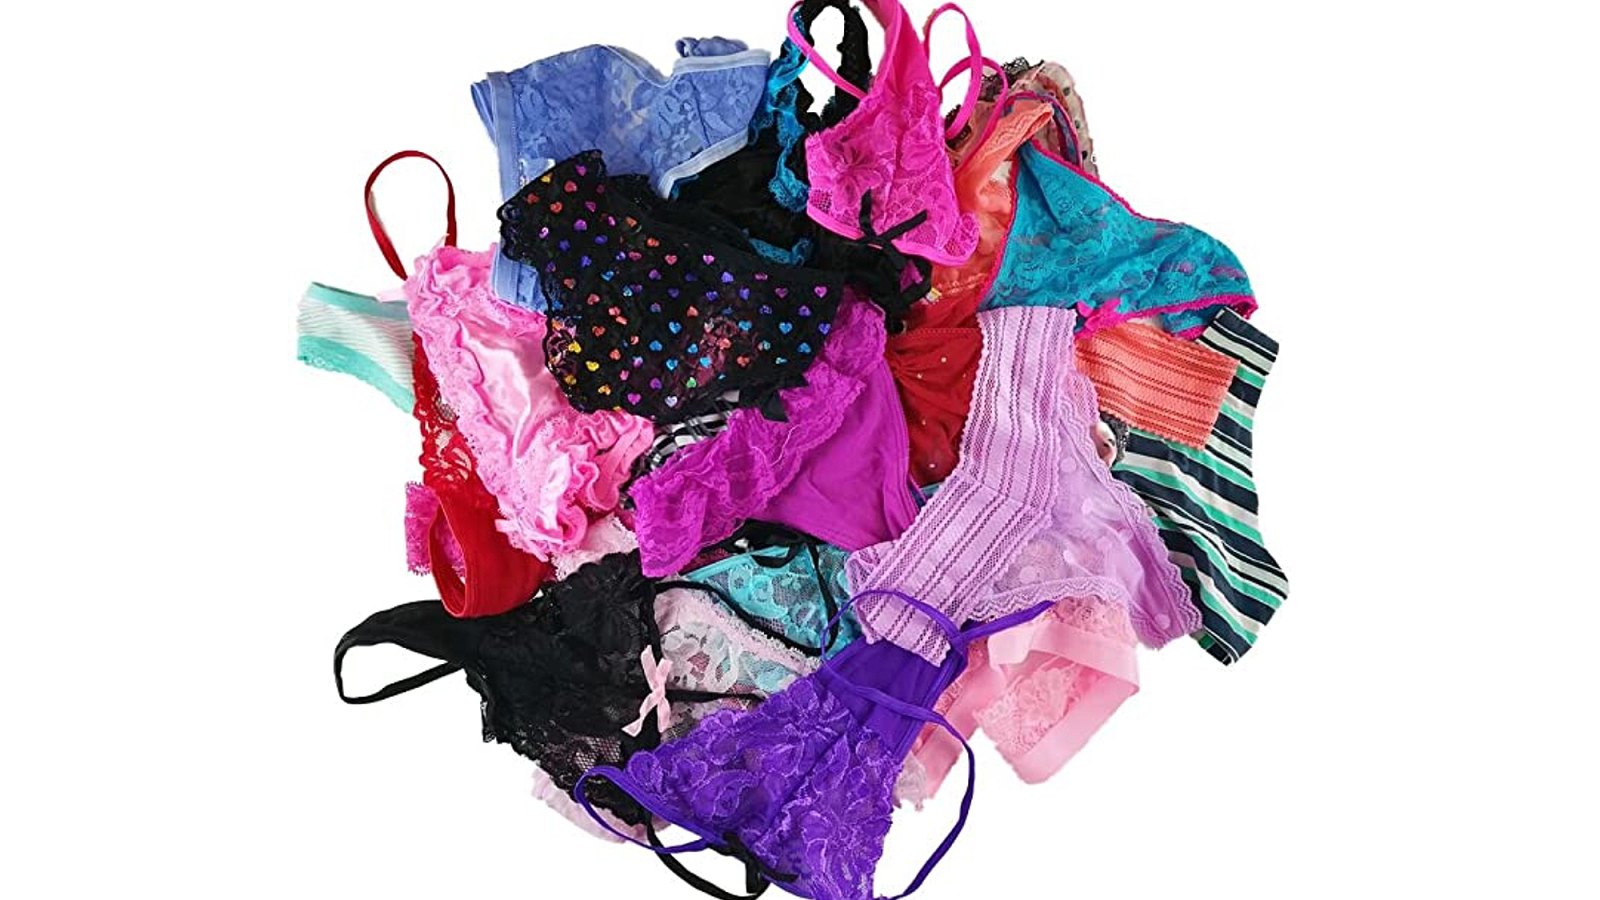 Fashion Heights Ltd - Time to refresh your underwear drawer, with